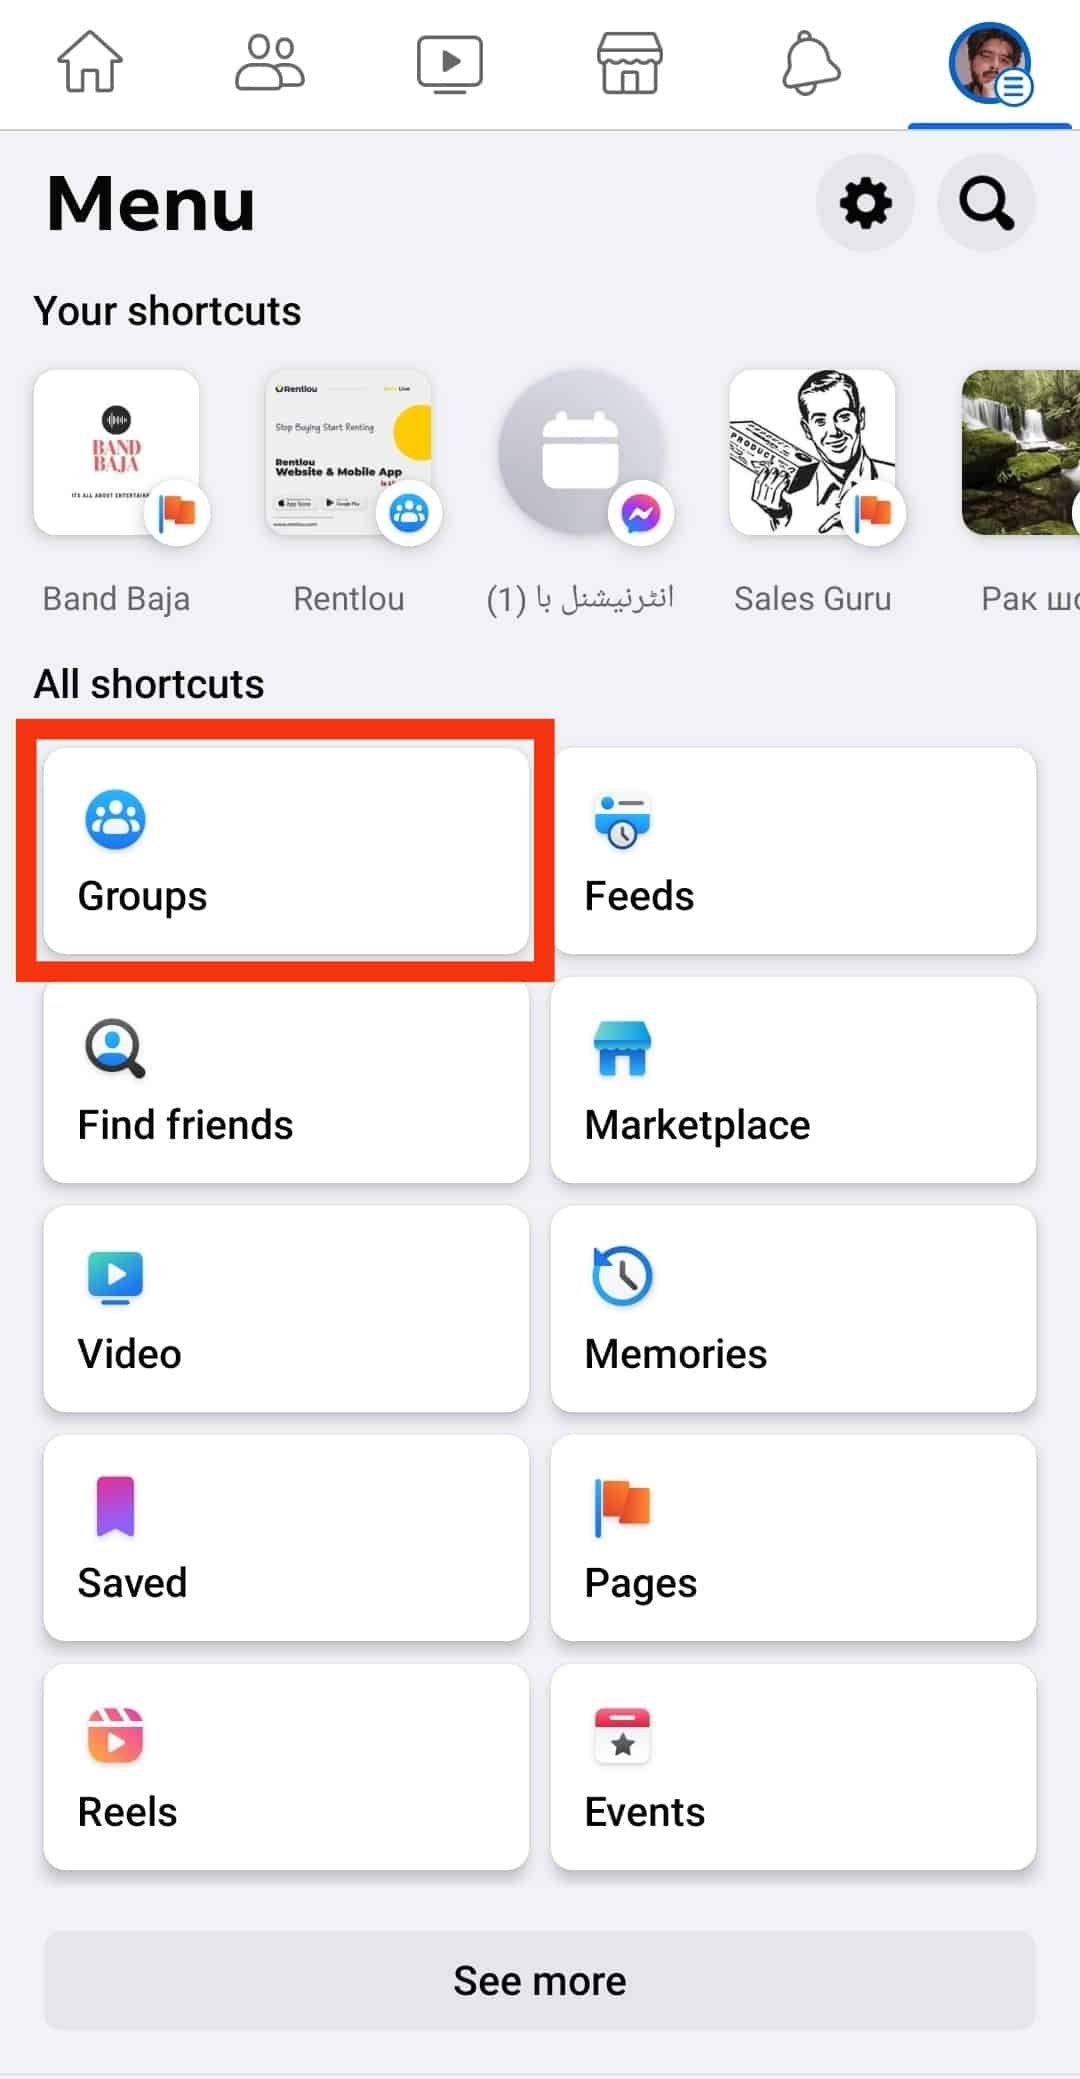 Select The Communities (Groups) Option